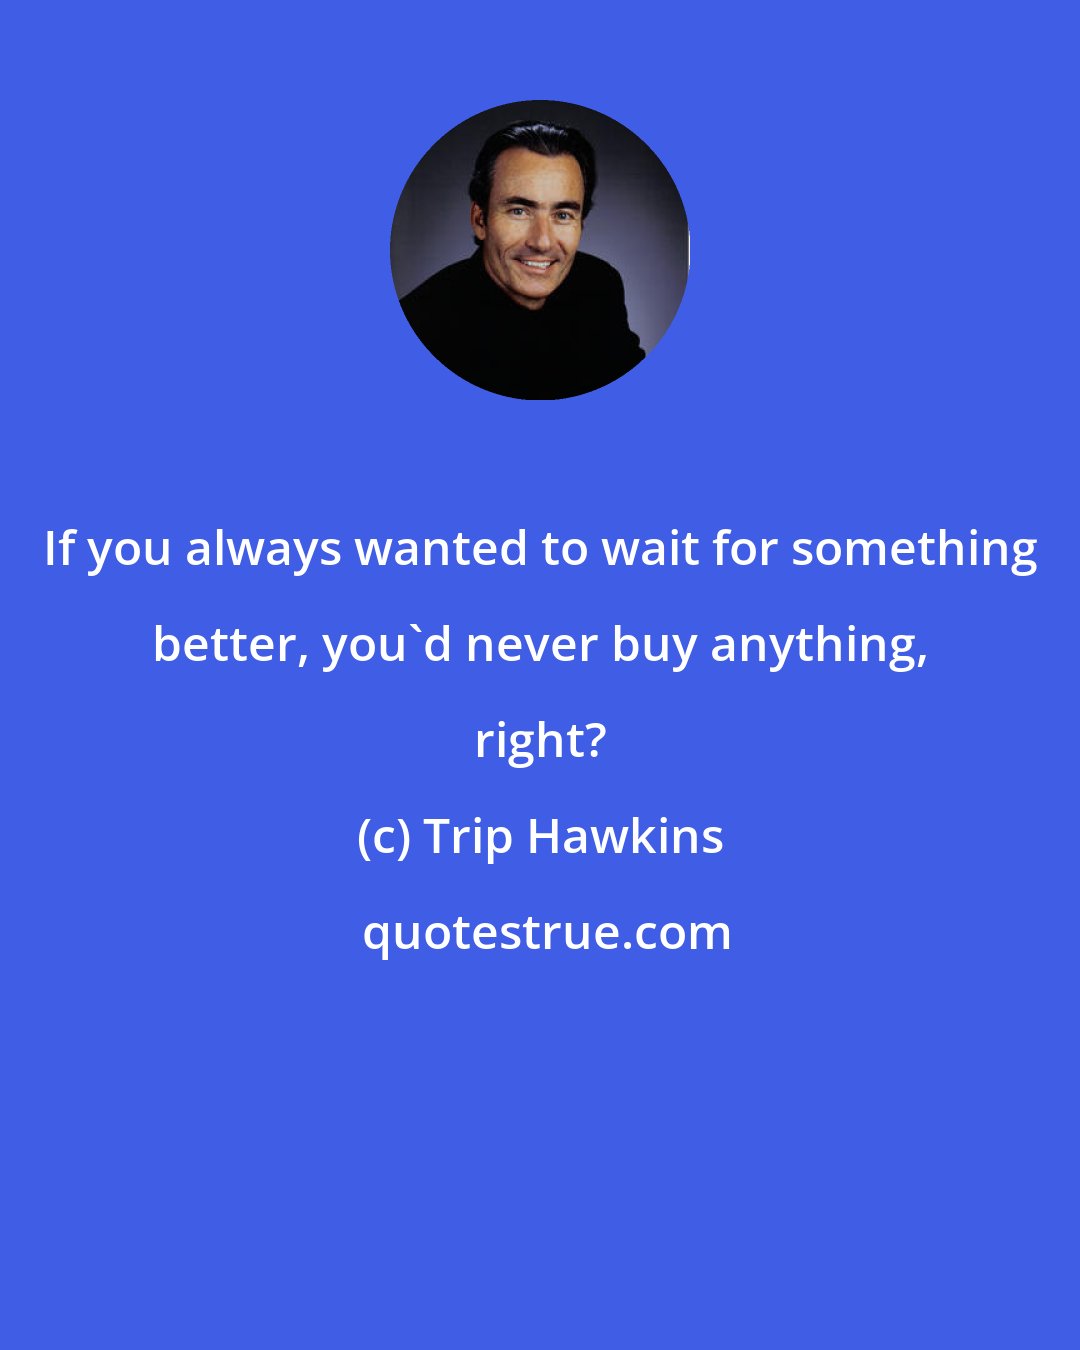 Trip Hawkins: If you always wanted to wait for something better, you'd never buy anything, right?